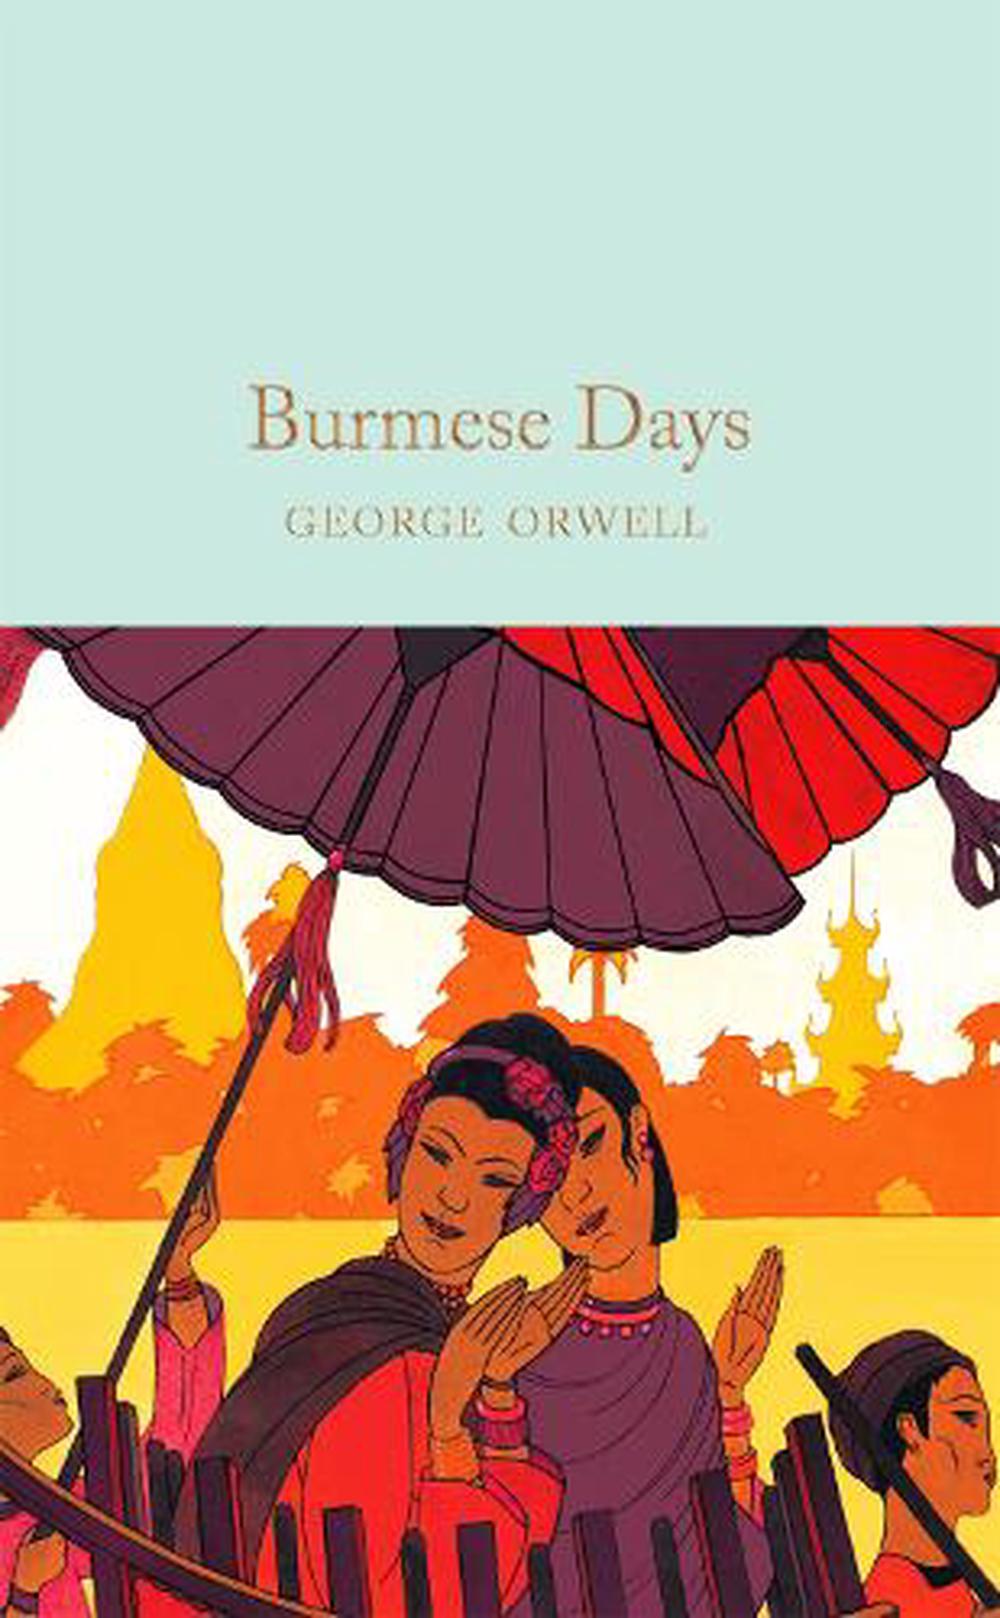 burmese days george orwell sparknotes